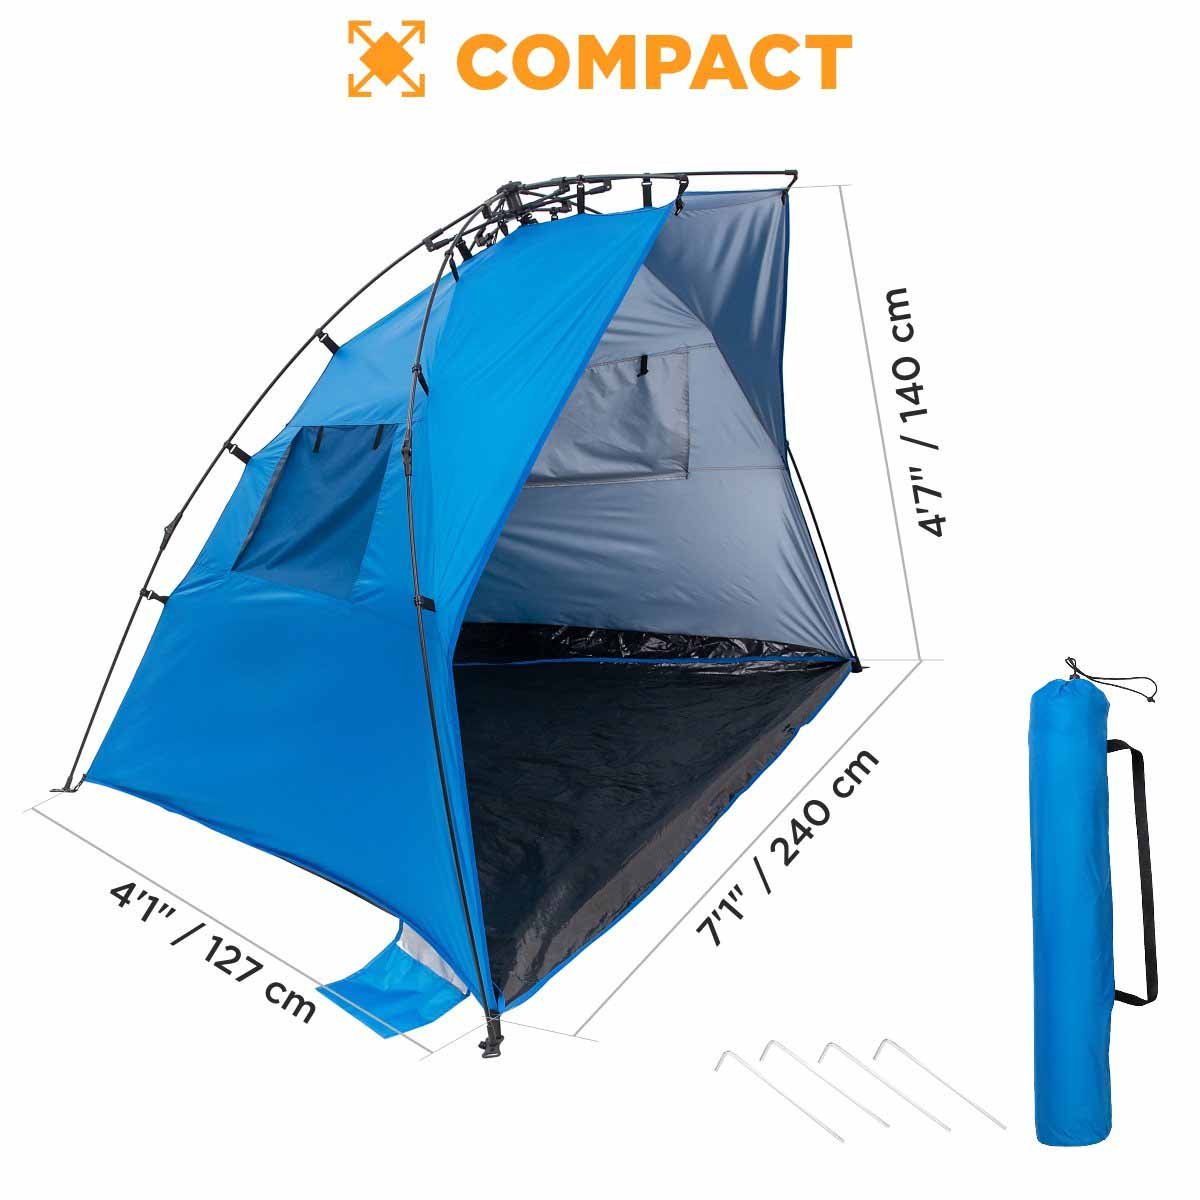 4 Person Large Easy Up Beach Tent Sun Shade Shelter is roomy - 7.1 feet wide, 4.1 feet long and 4.7 feet high.